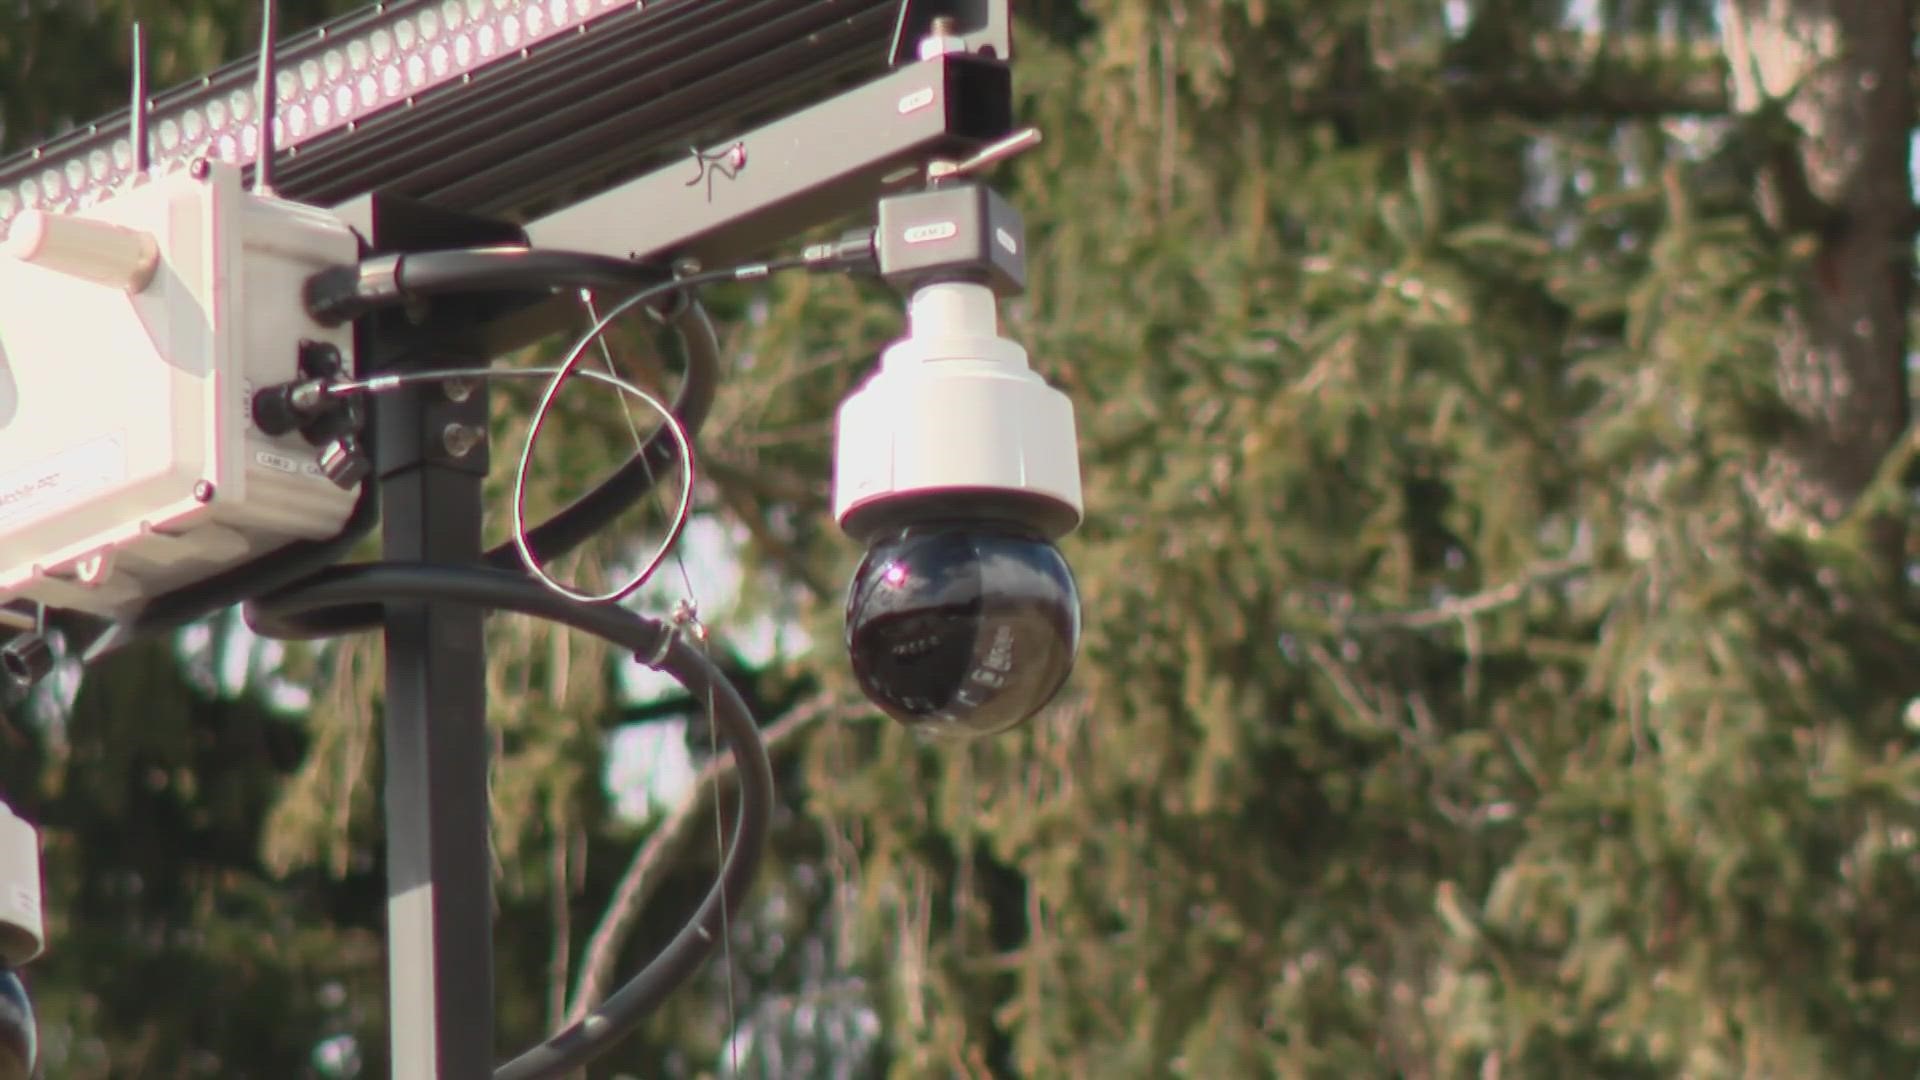 The county installed a motion-sensor system so officials can keep track of the fleet.